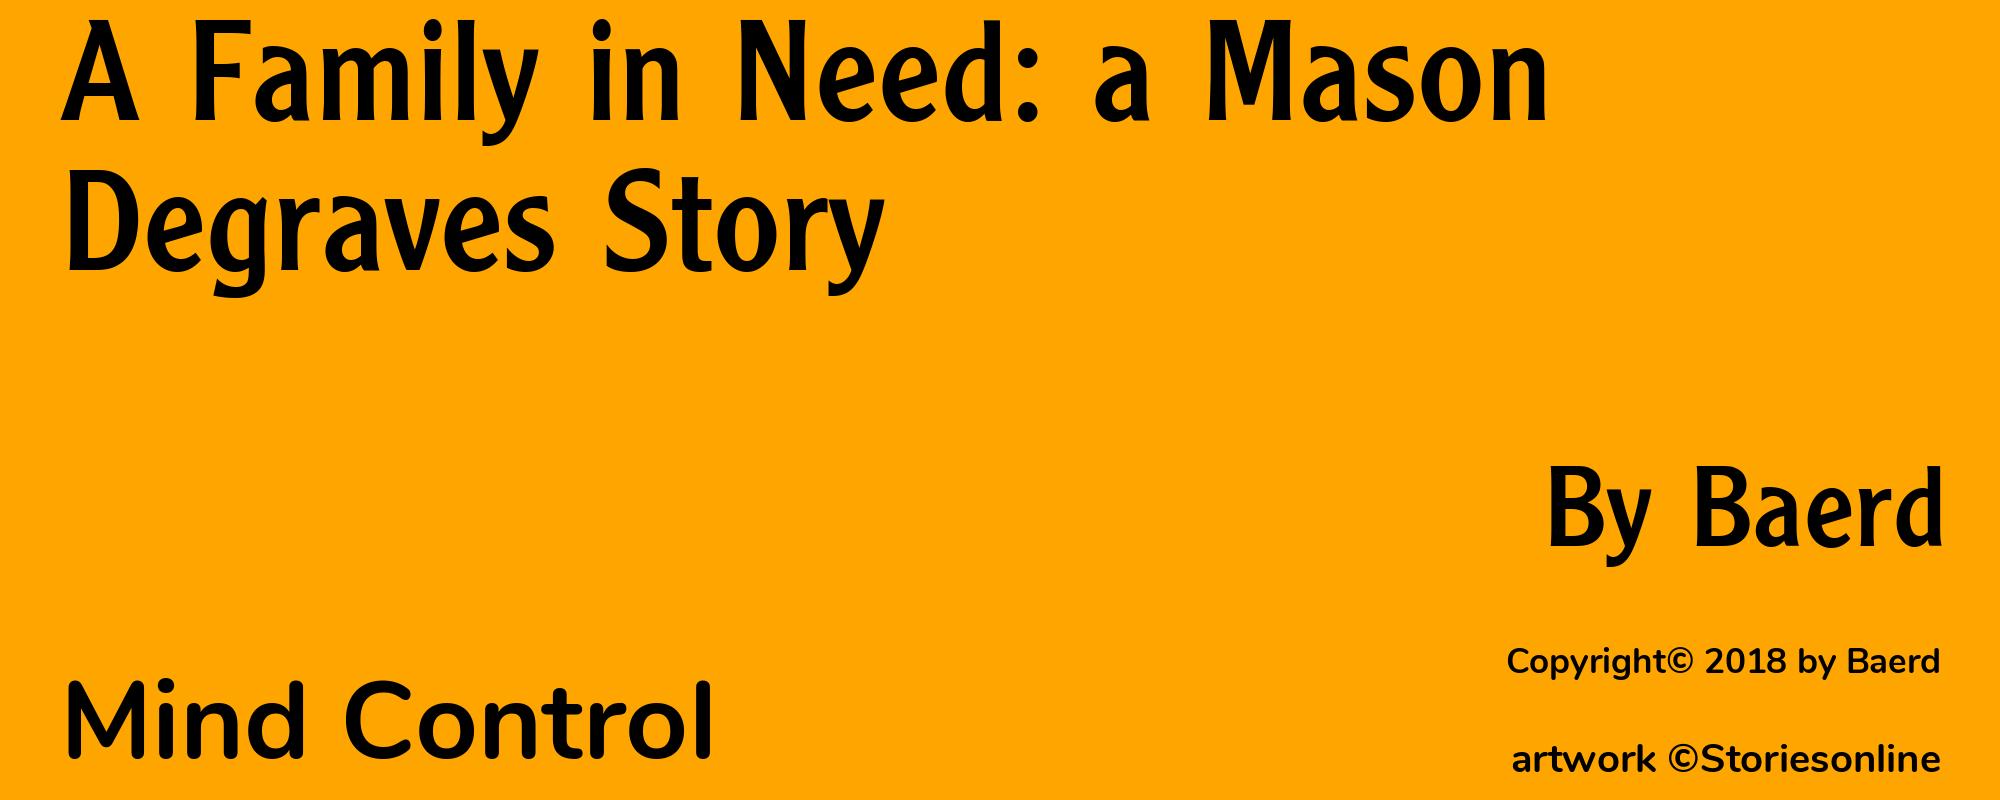 A Family in Need: a Mason Degraves Story - Cover